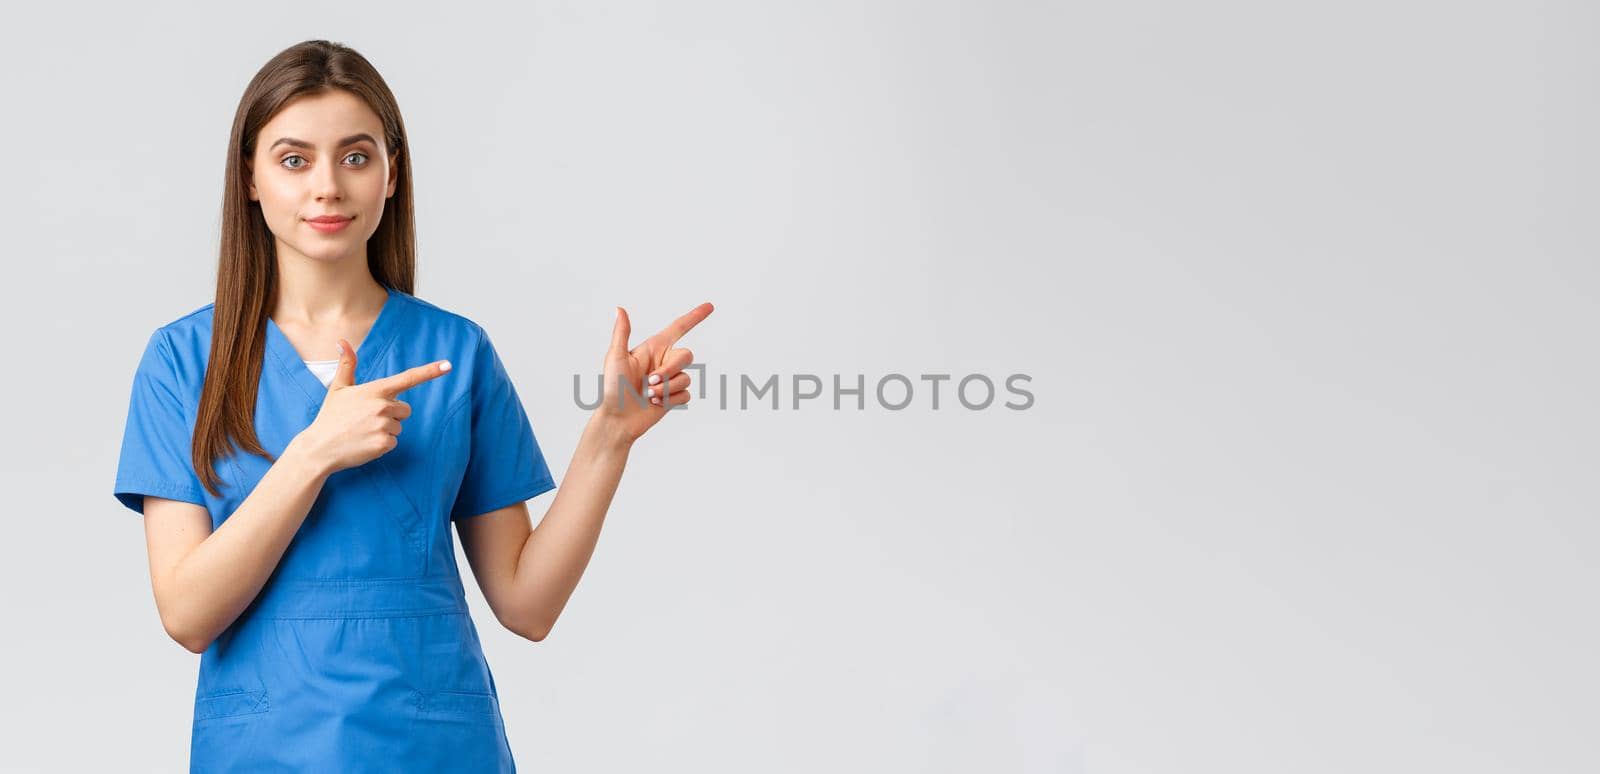 Healthcare workers, prevent virus, insurance and medicine concept. Young nurse or doctor in blue scrubs pointing fingers right, recommend banner or promo for clinic patients.